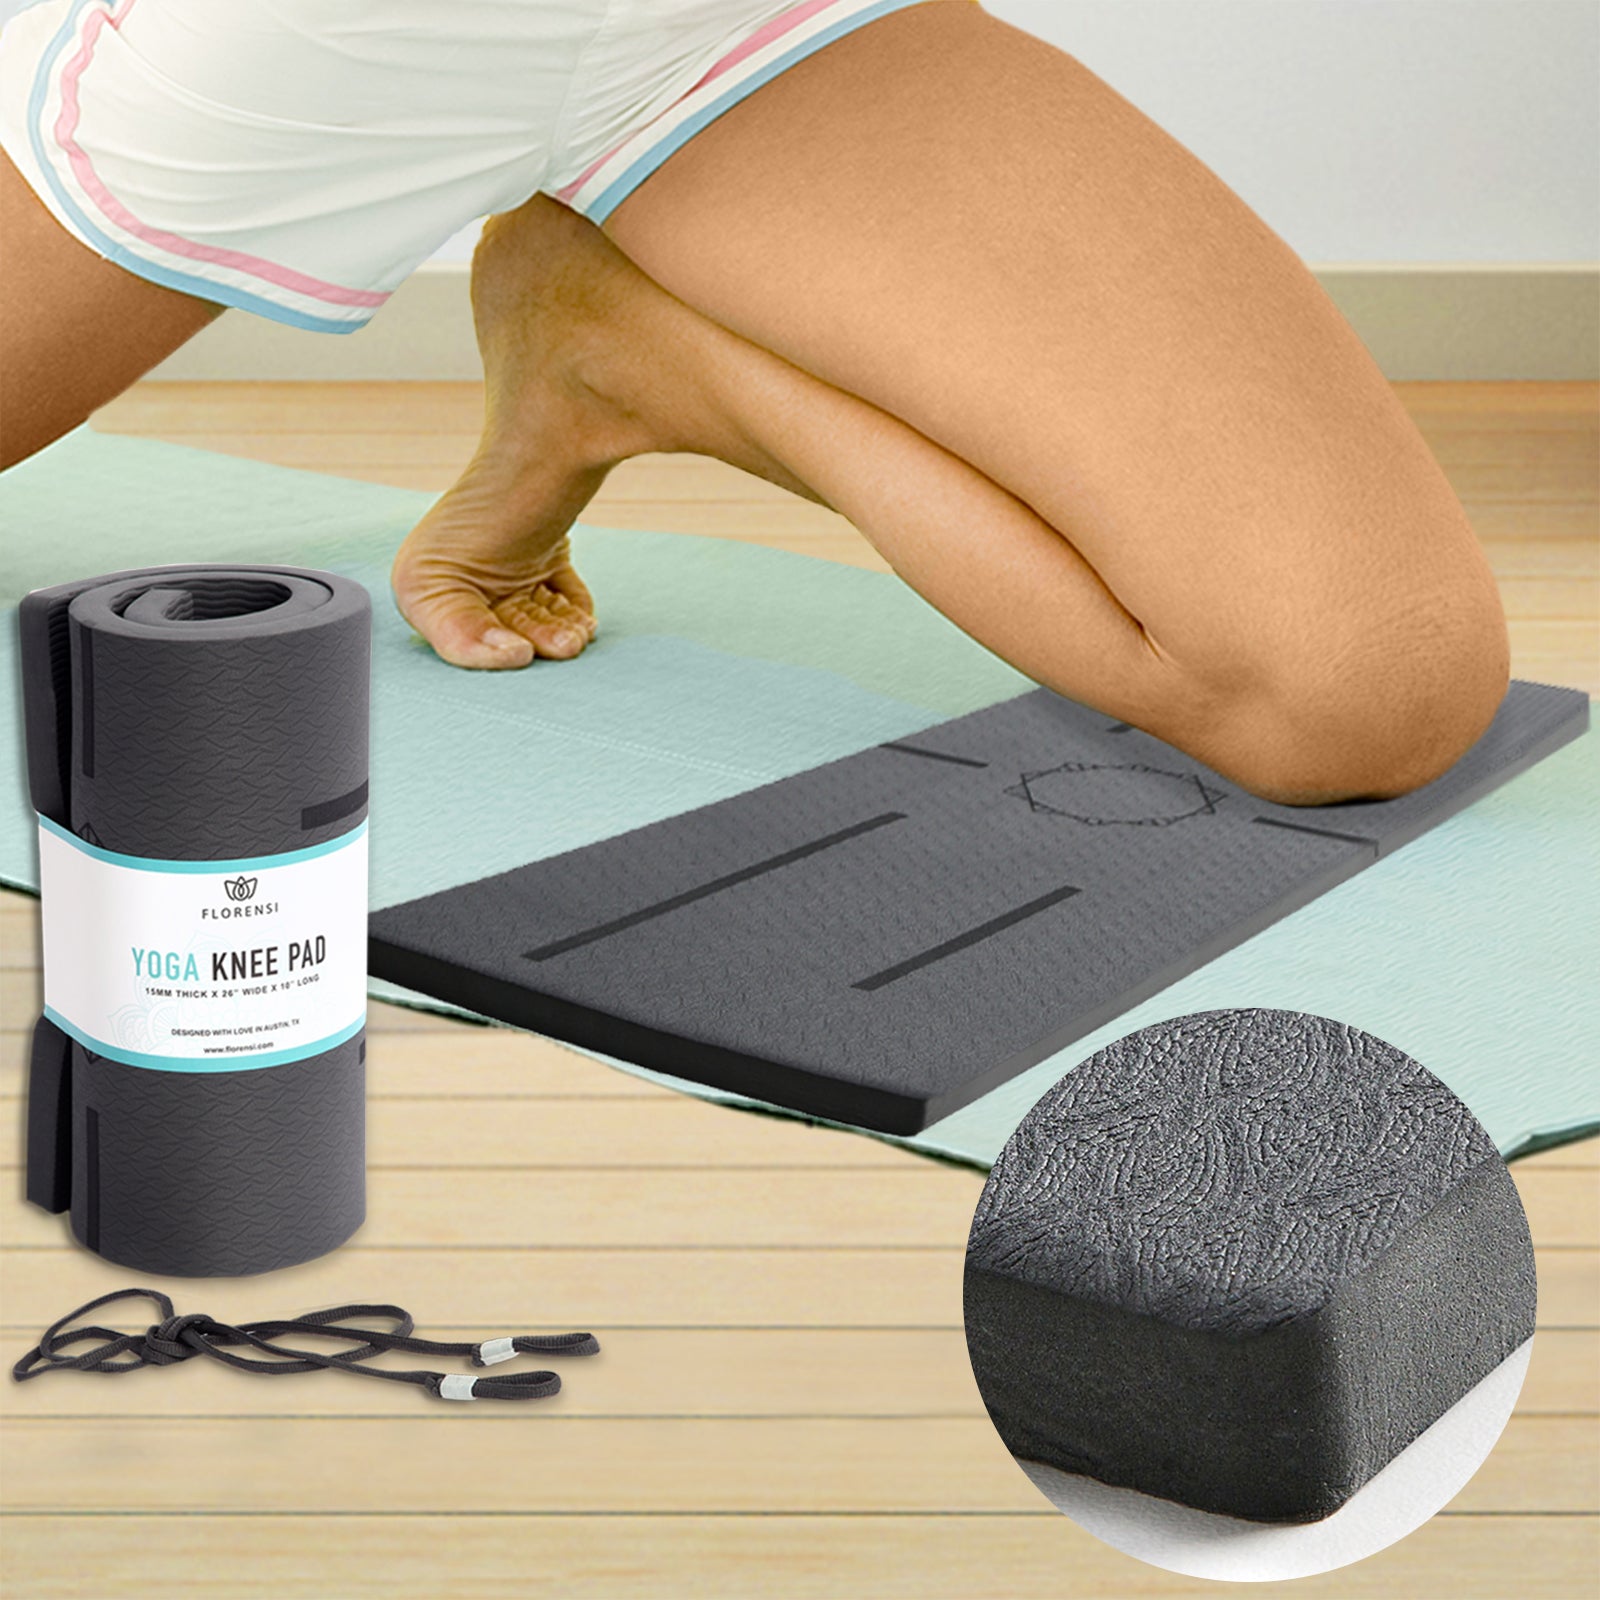 2 IN 1 Yoga Knee Pad Slider, Core Gliding Disc, Extra Thick Yoga Mat,  Cushion, Wrist Support, Exercise, Home Gym Workout Equipment, Honeycomb